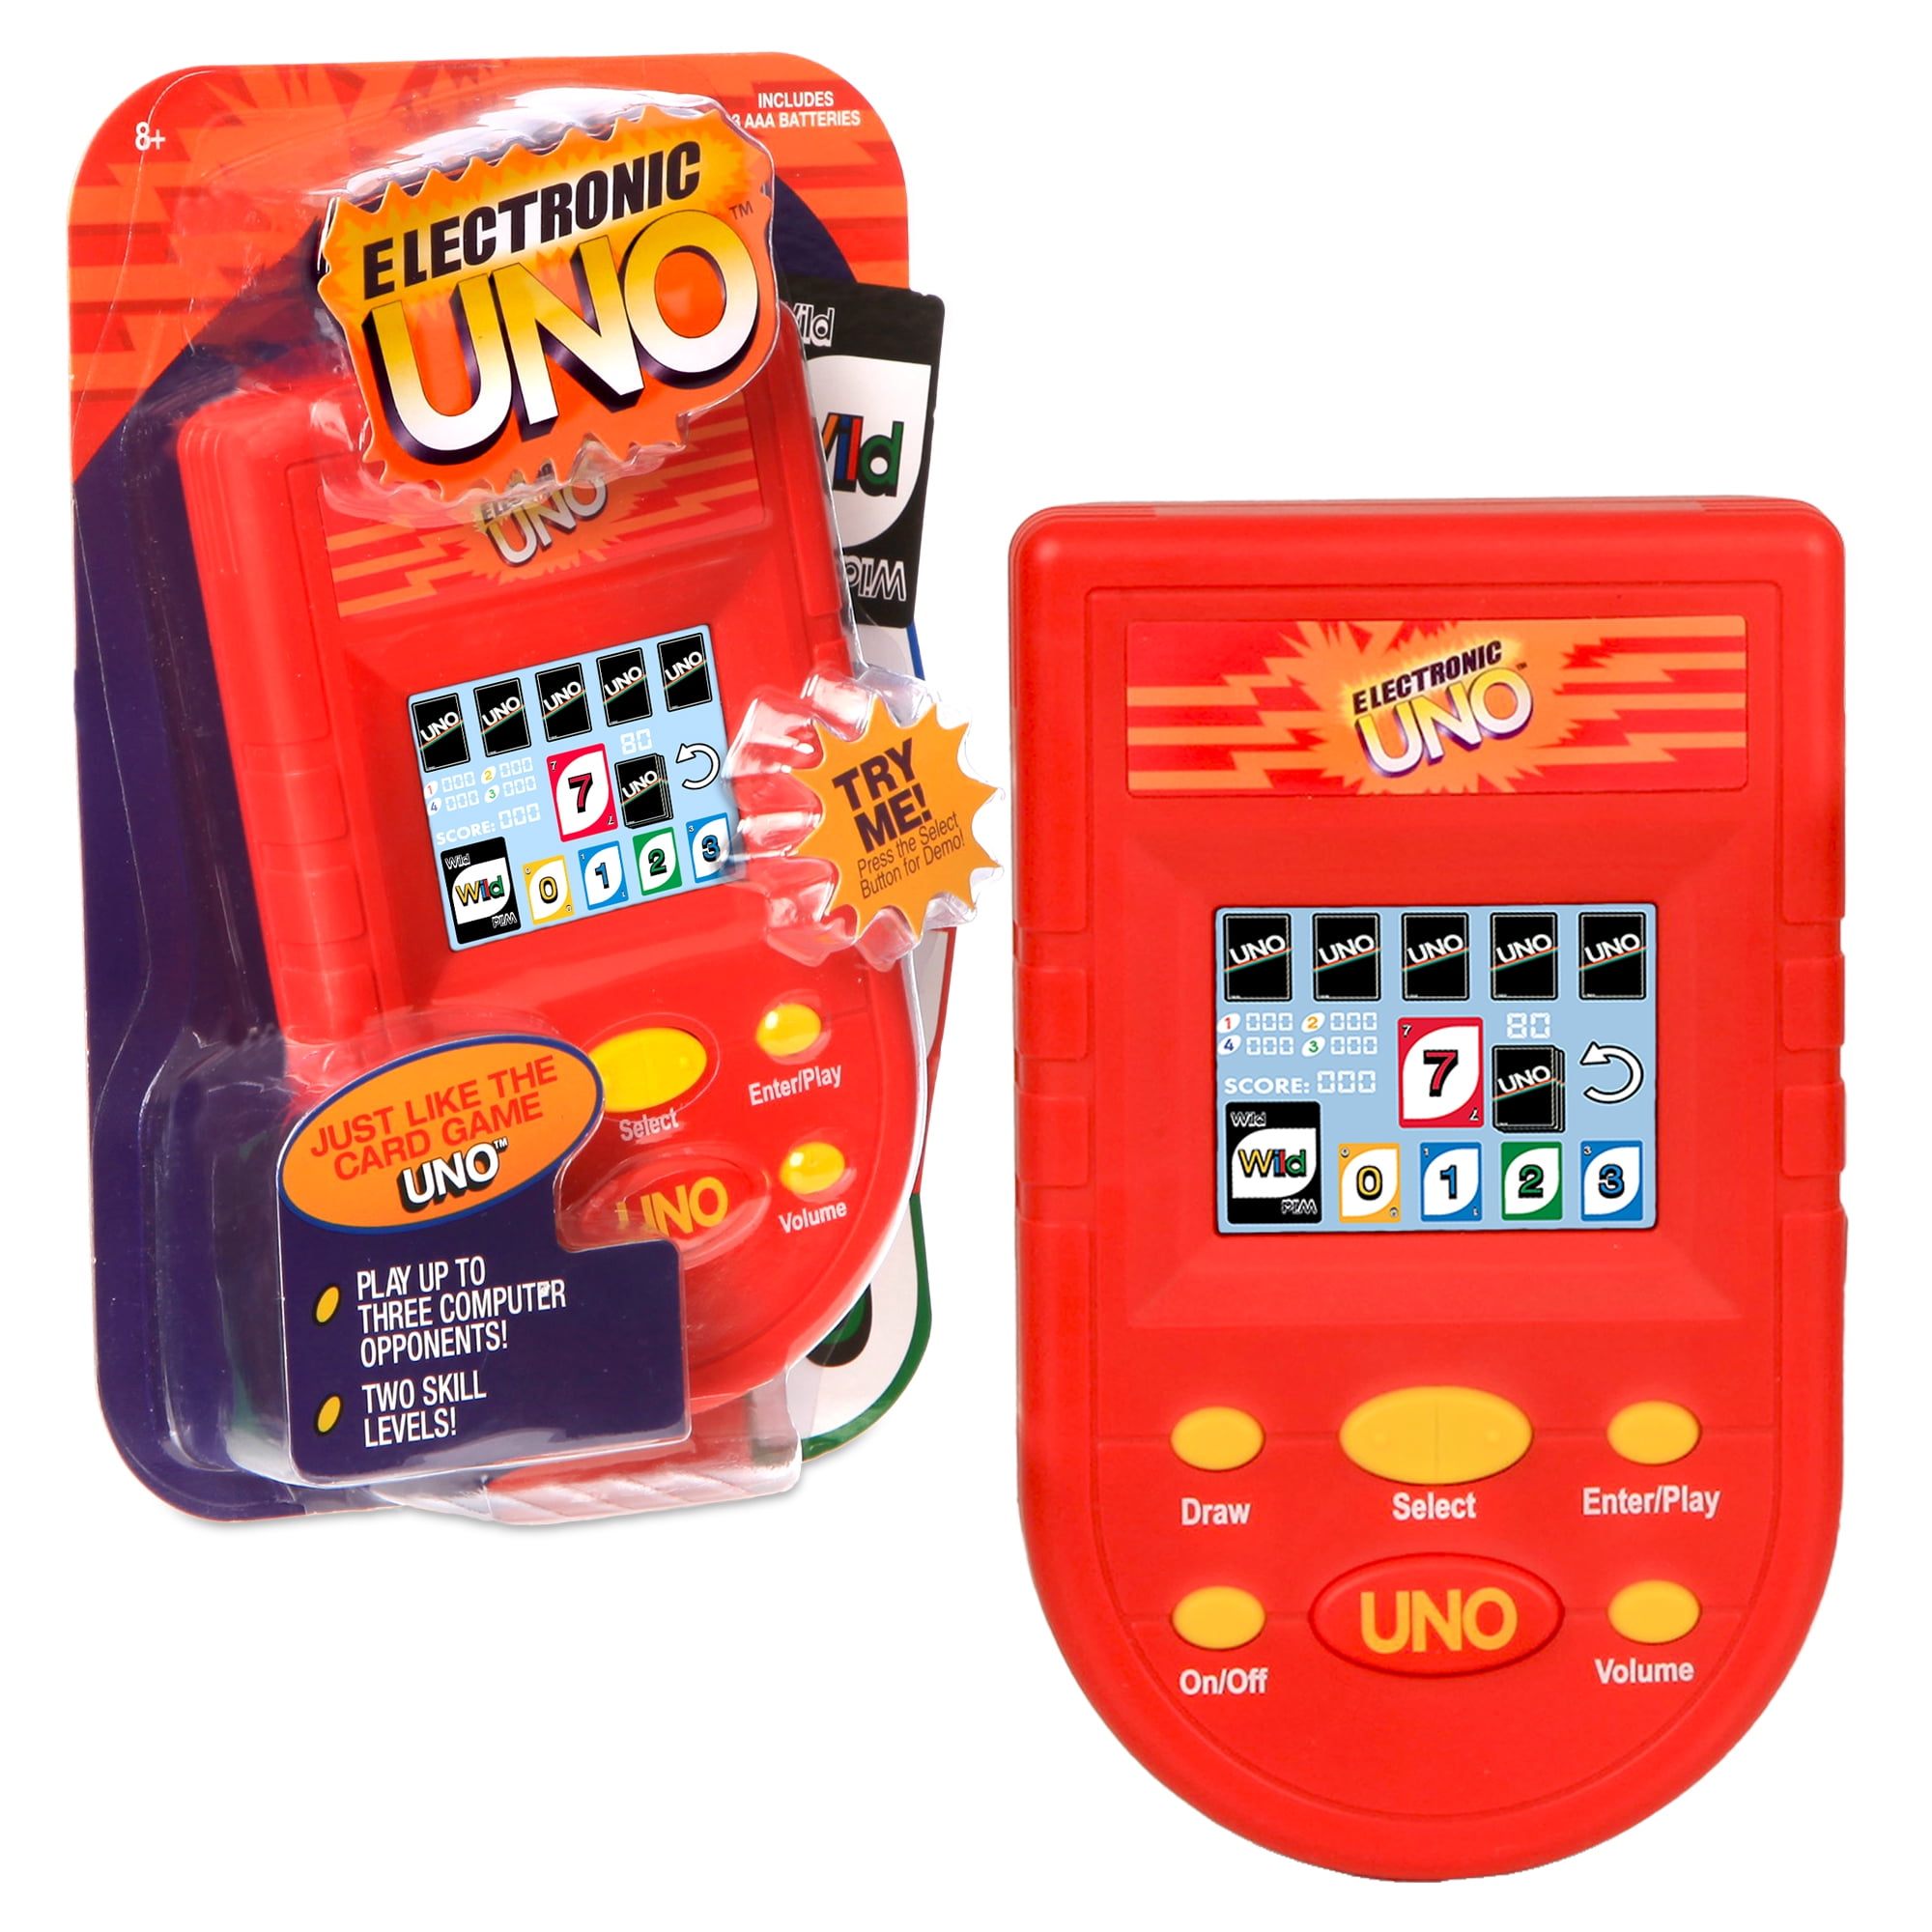 Sudoku Handheld Electronic Game by Pms for sale online 